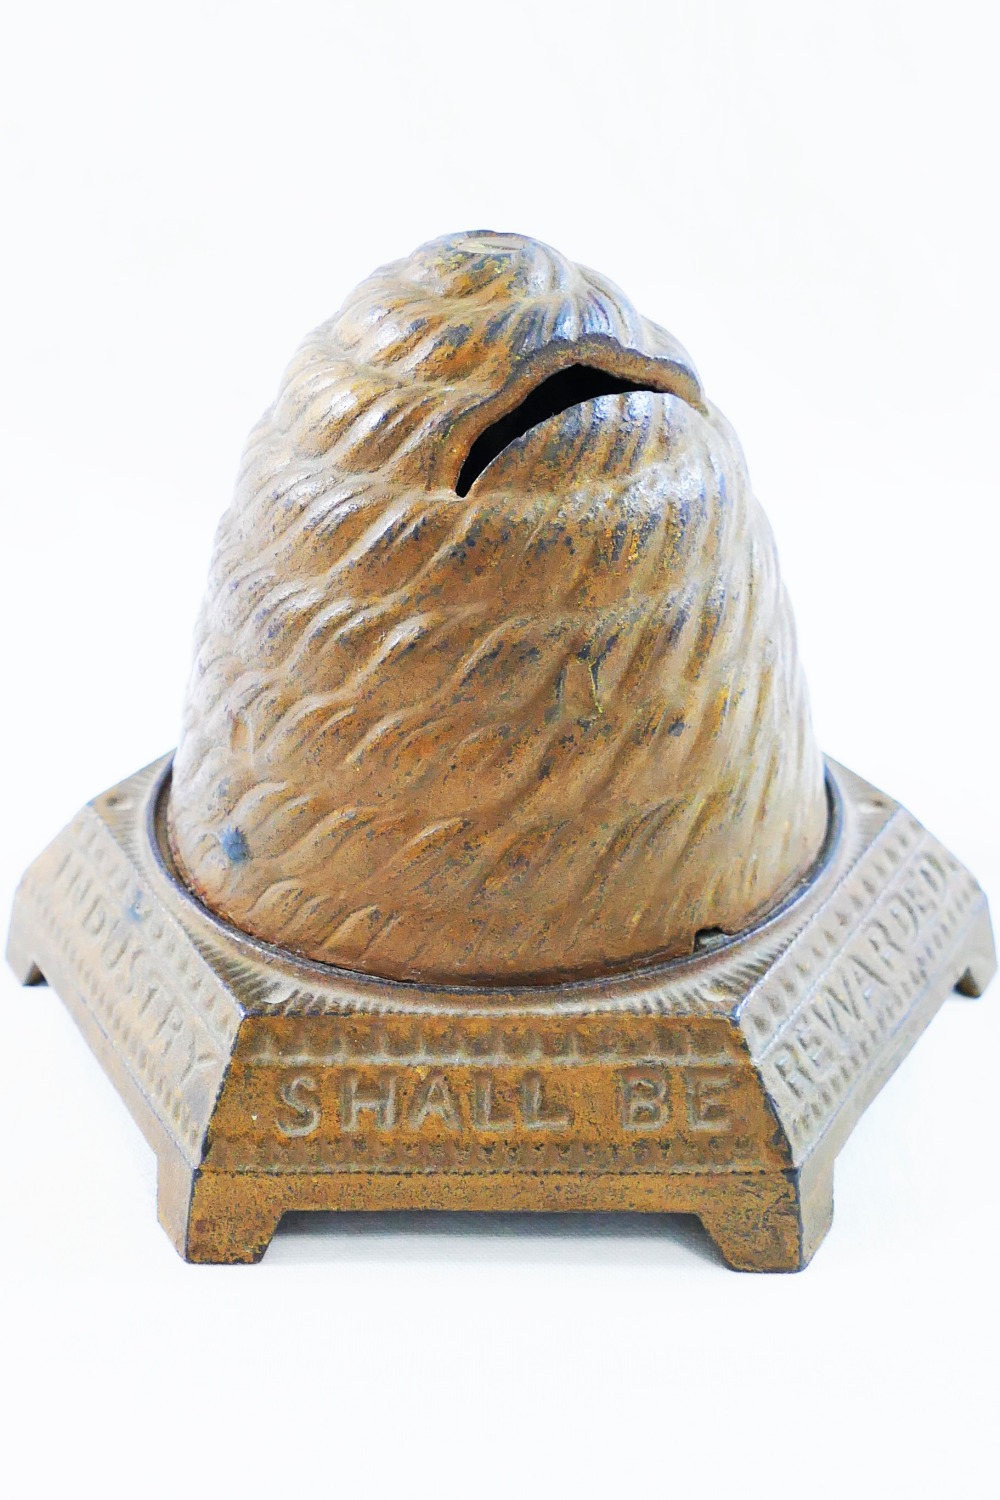 A 19th century cast iron money box in the shape of a skep beehive,